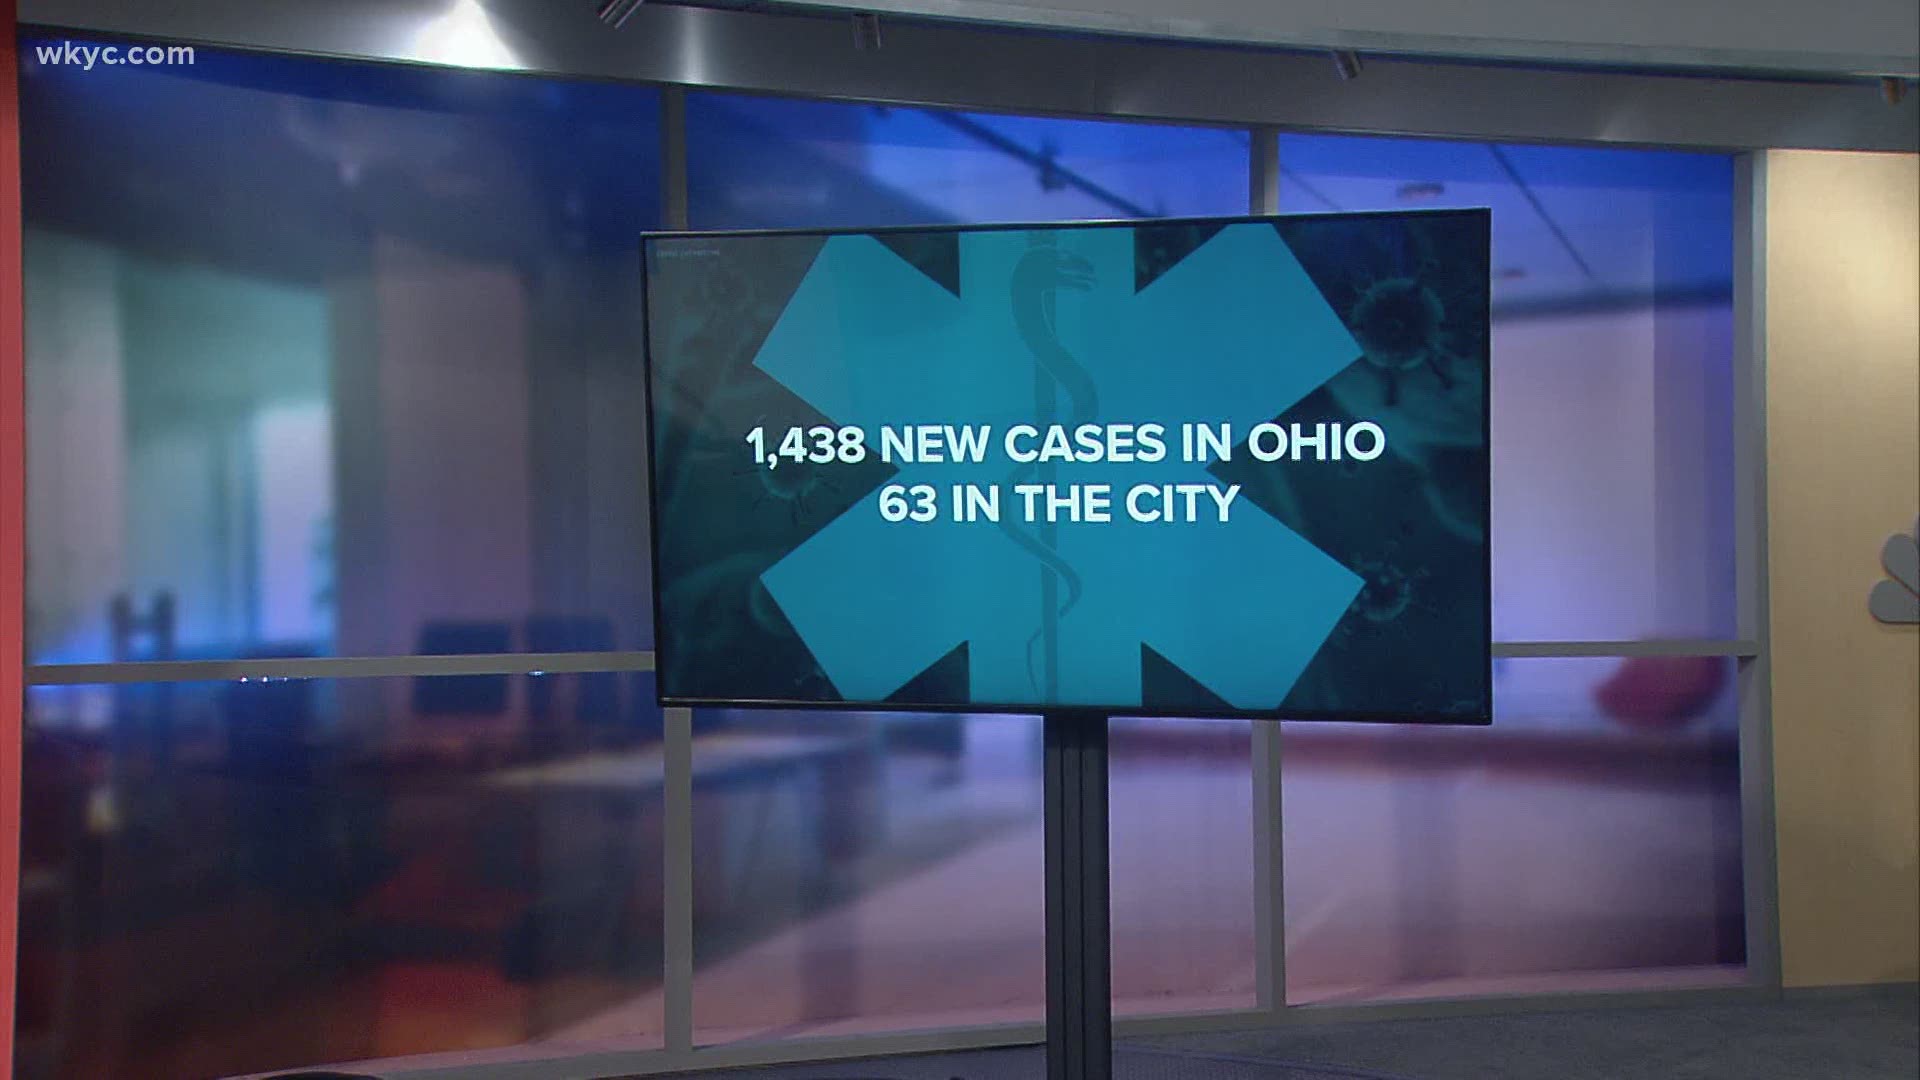 The Ohio Department of Health reports 1,438 new cases today.  That is down from Friday and there were no deaths reported today.